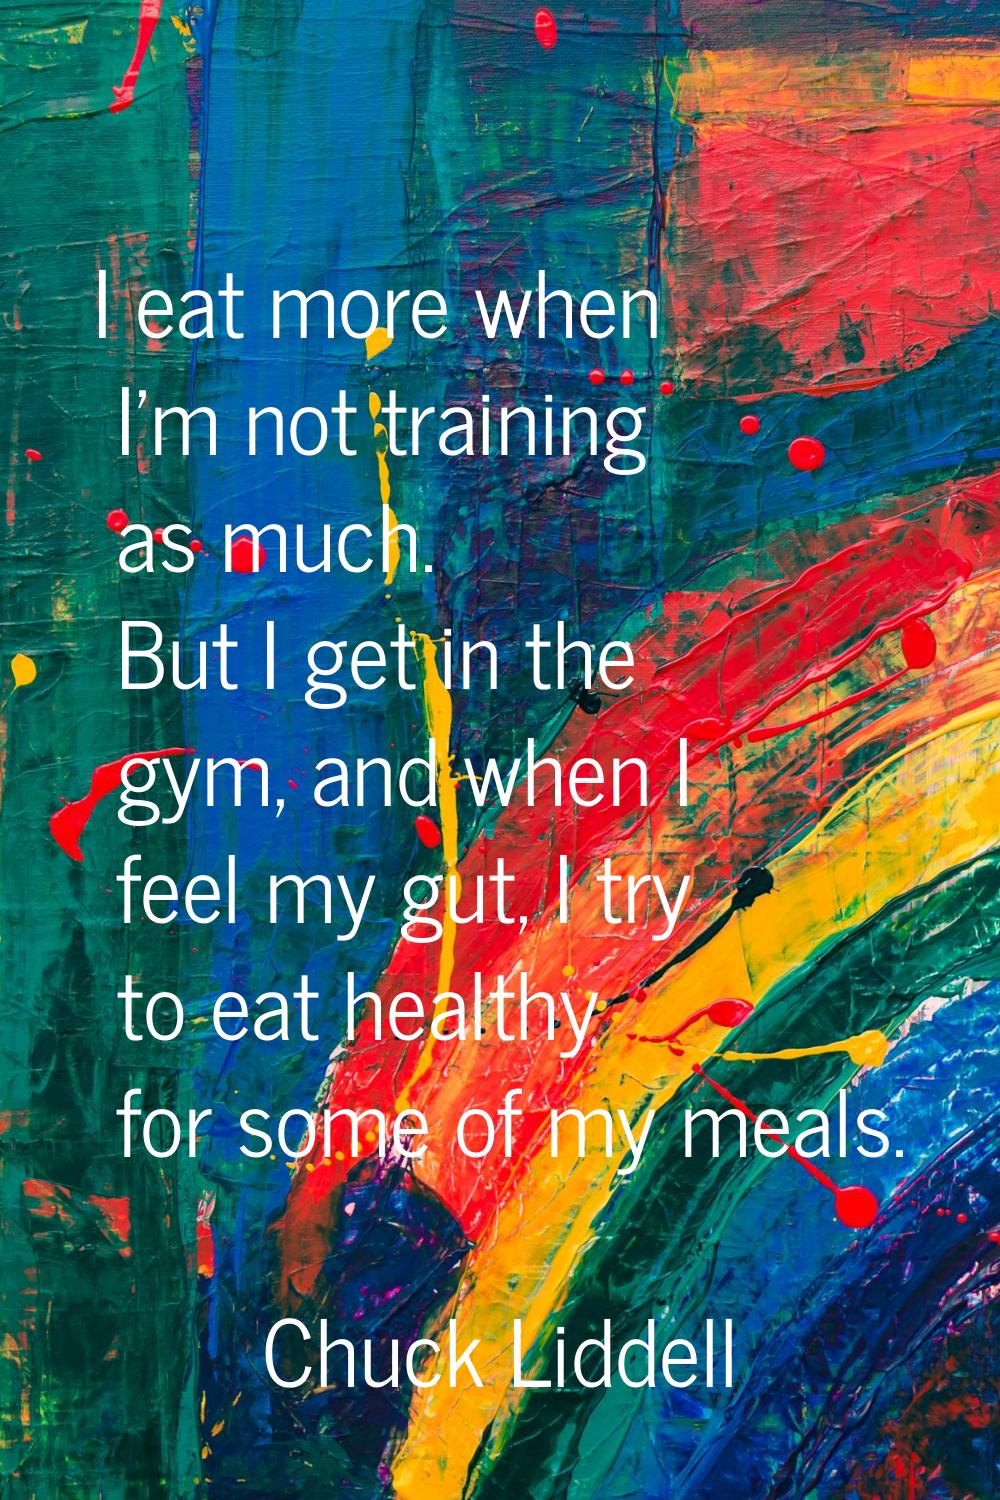 I eat more when I'm not training as much. But I get in the gym, and when I feel my gut, I try to ea